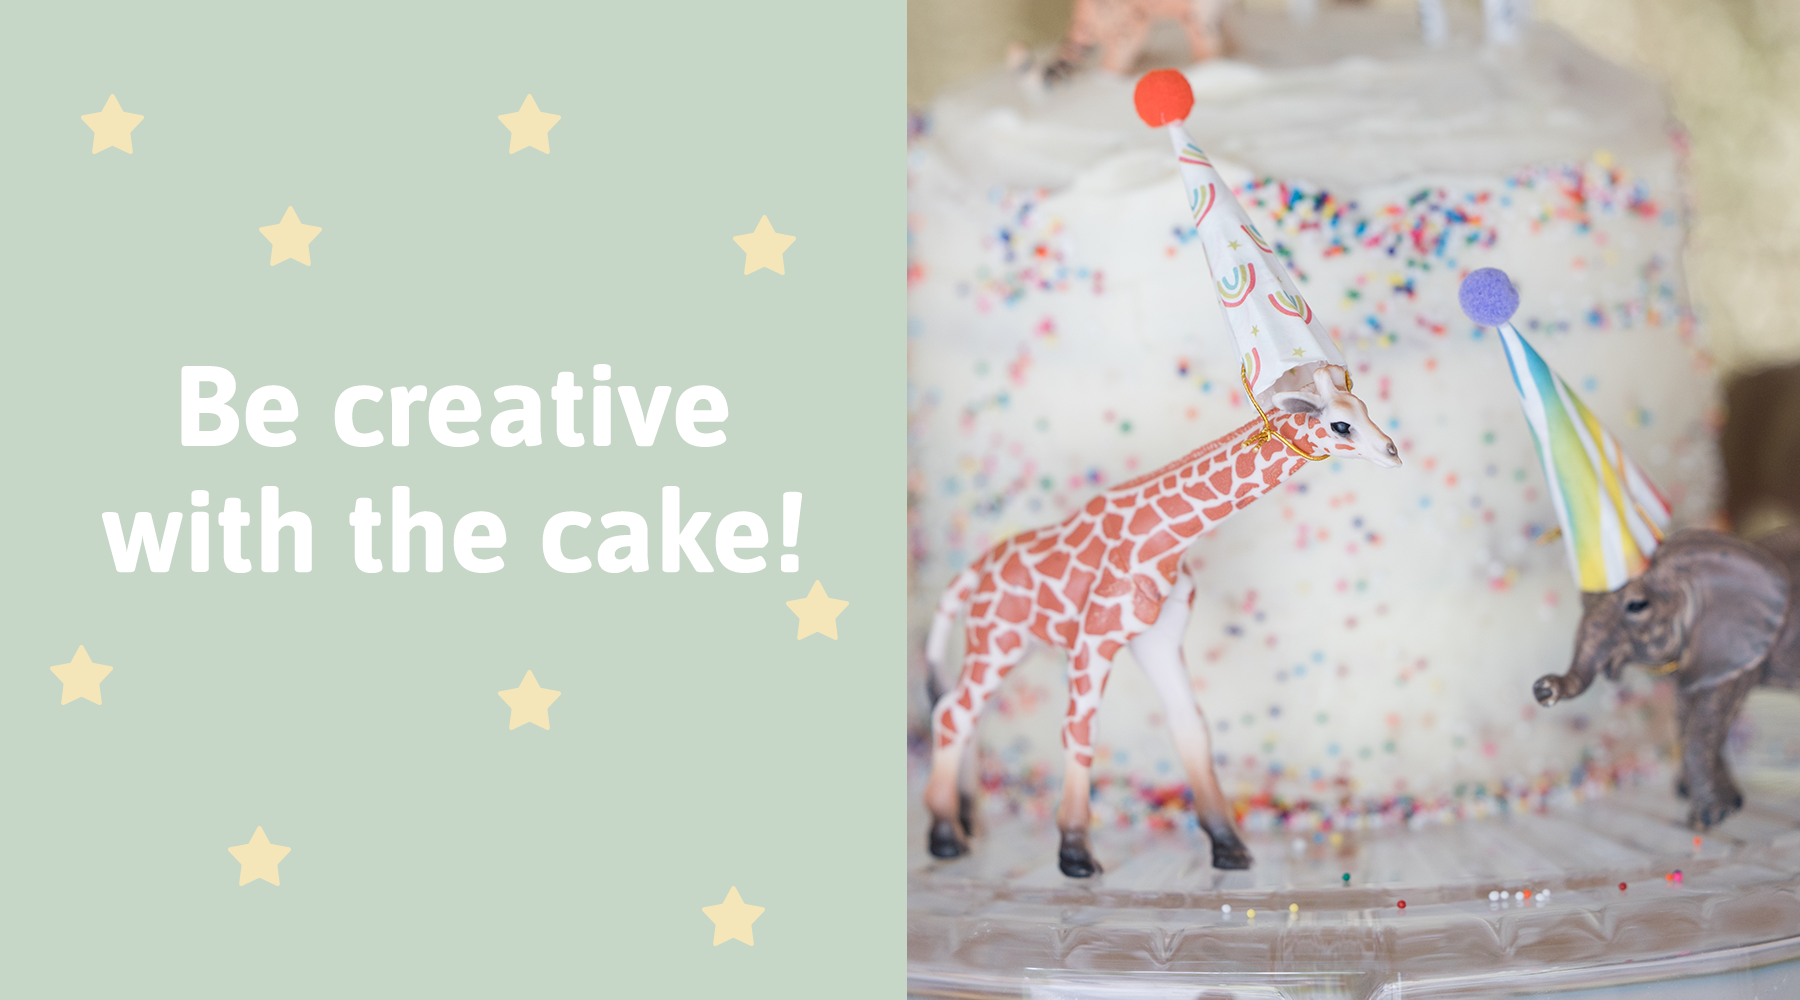 Be creative with the cake